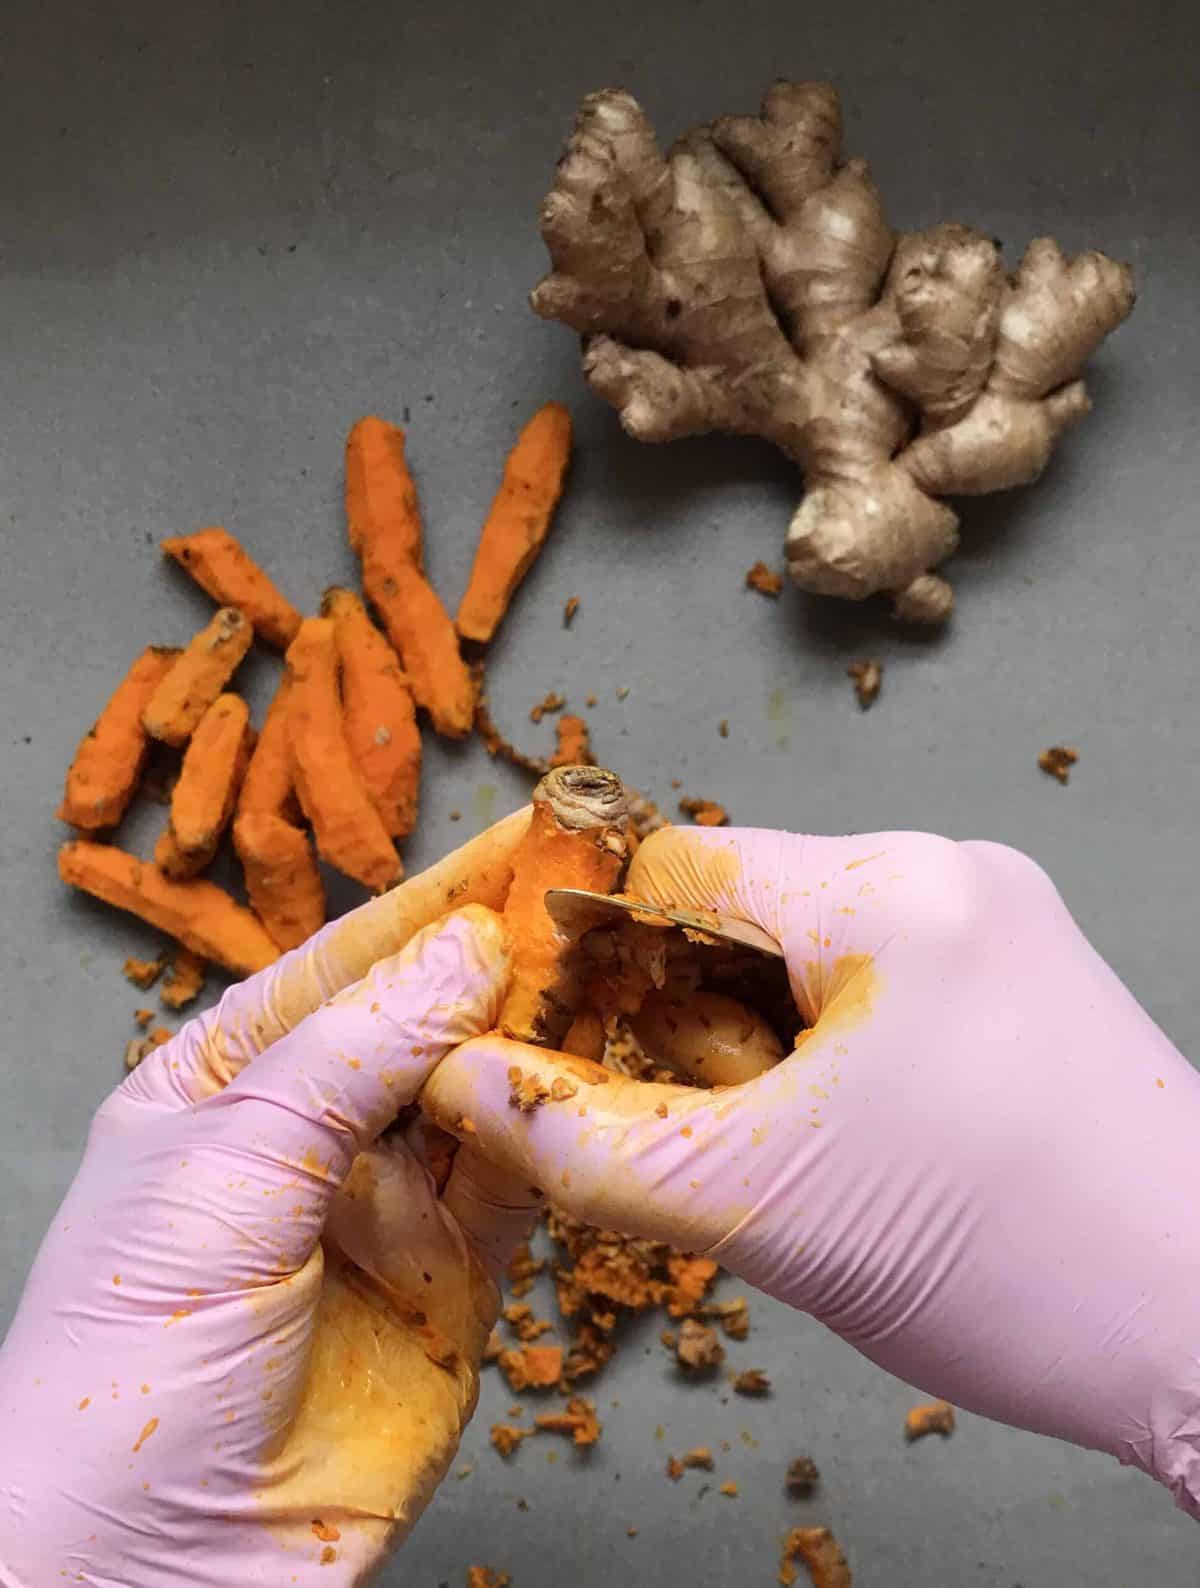 Unpeeled ginger and peeled turmeric laying on a flat surface and two hands in pink gloves peeling a turmeric piece with a spoon